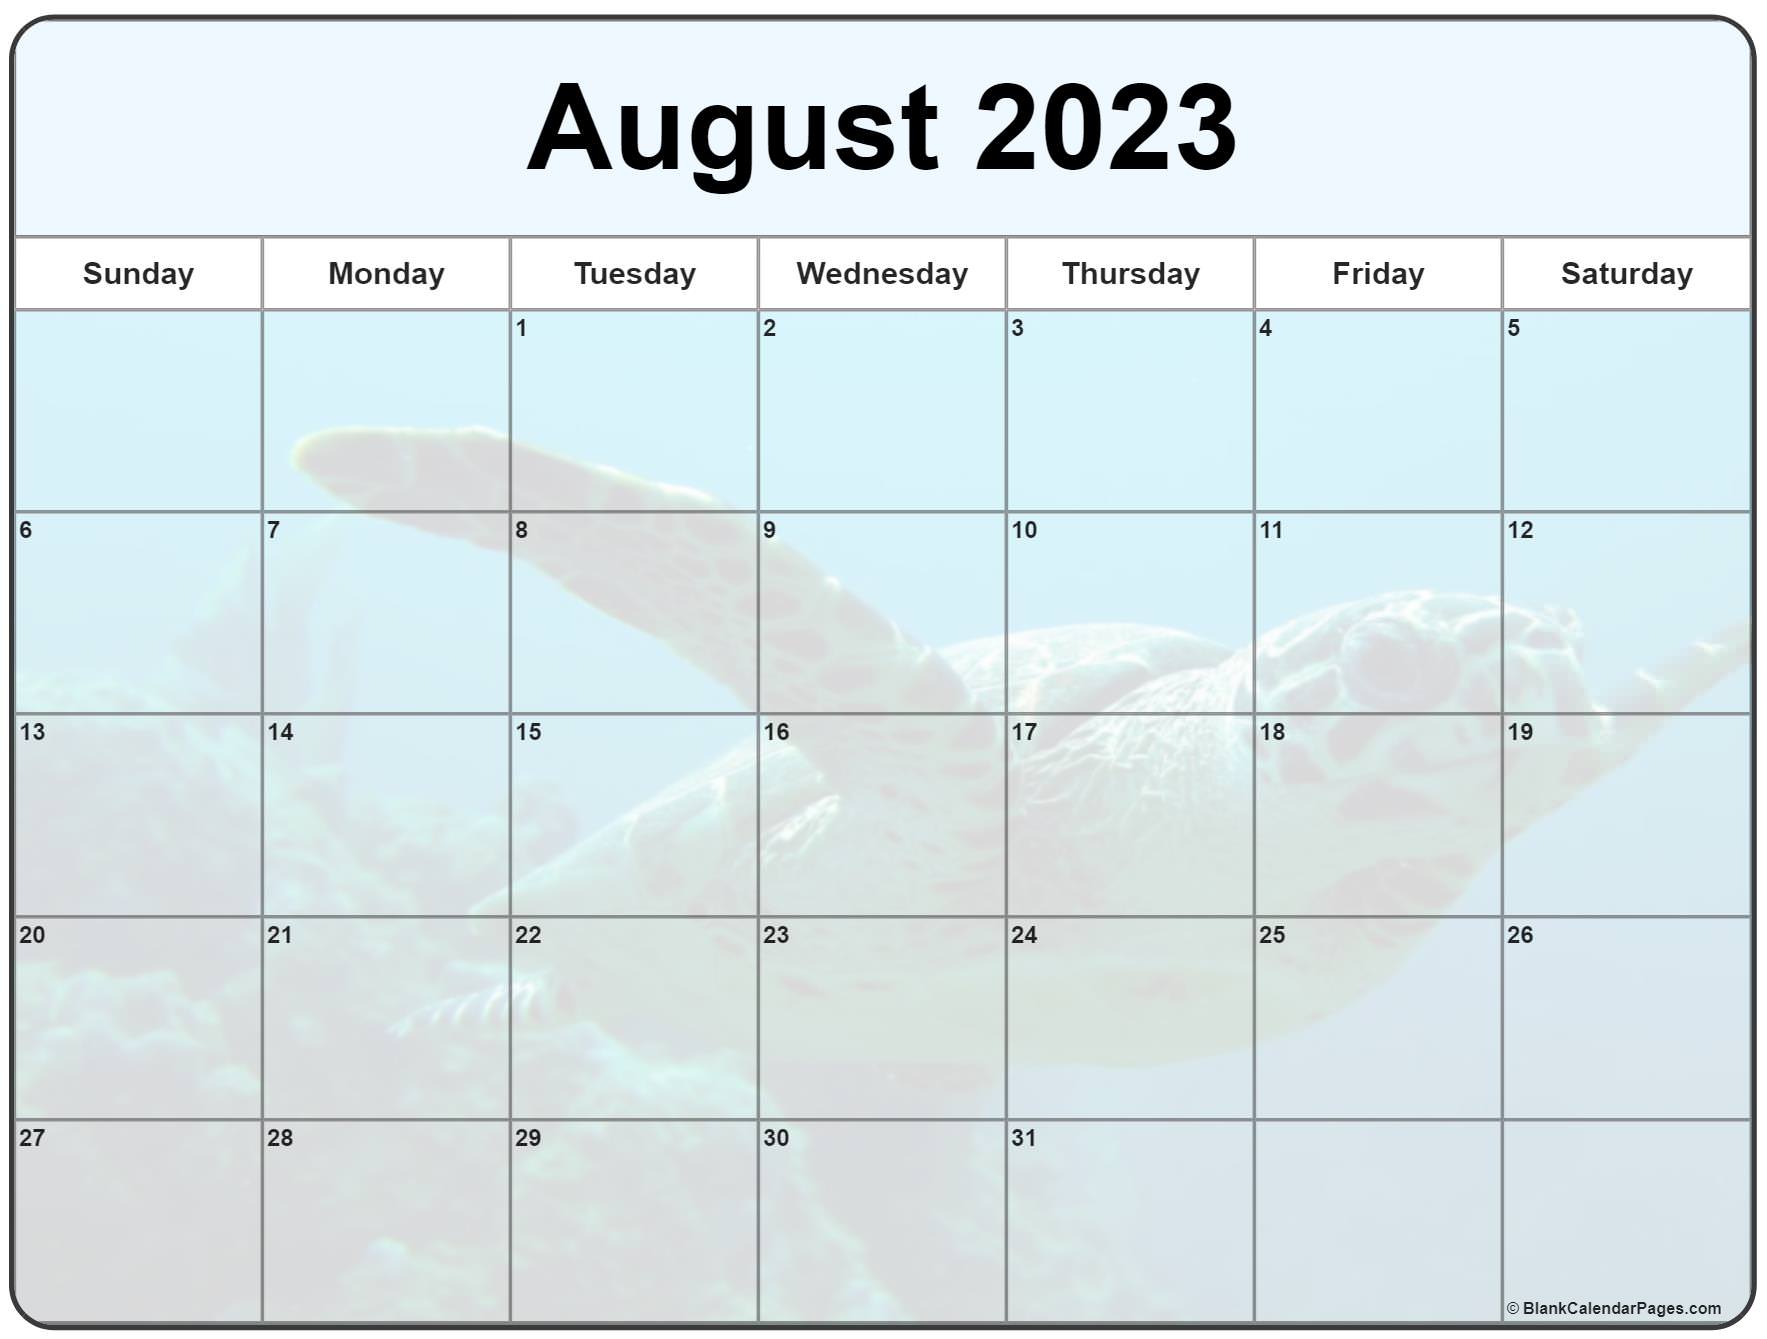 Collection of August 2023 photo calendars with image filters